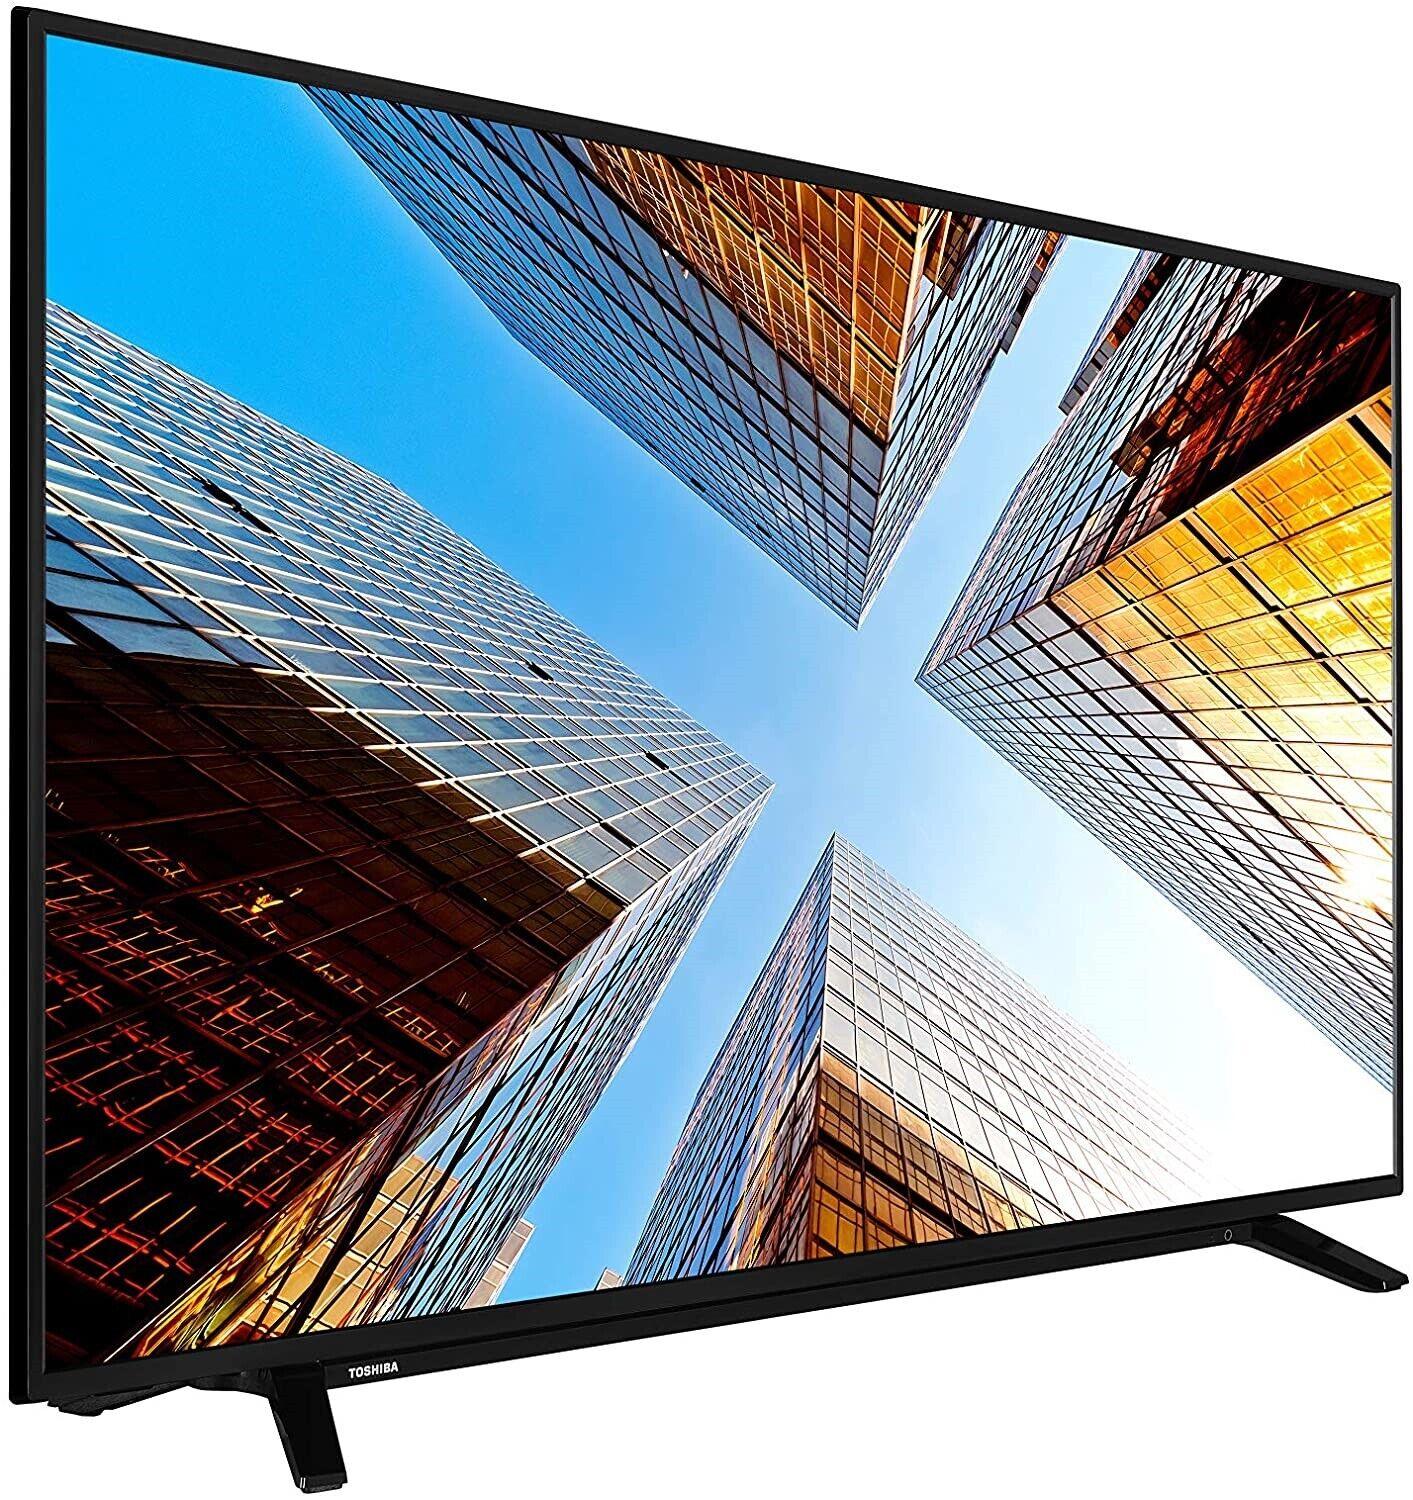 Toshiba 50UL2063DB 50-Inch Smart 4K Ultra-HD LED TV COLLECTION ONLY NO STAND U - Smart Clear Vision